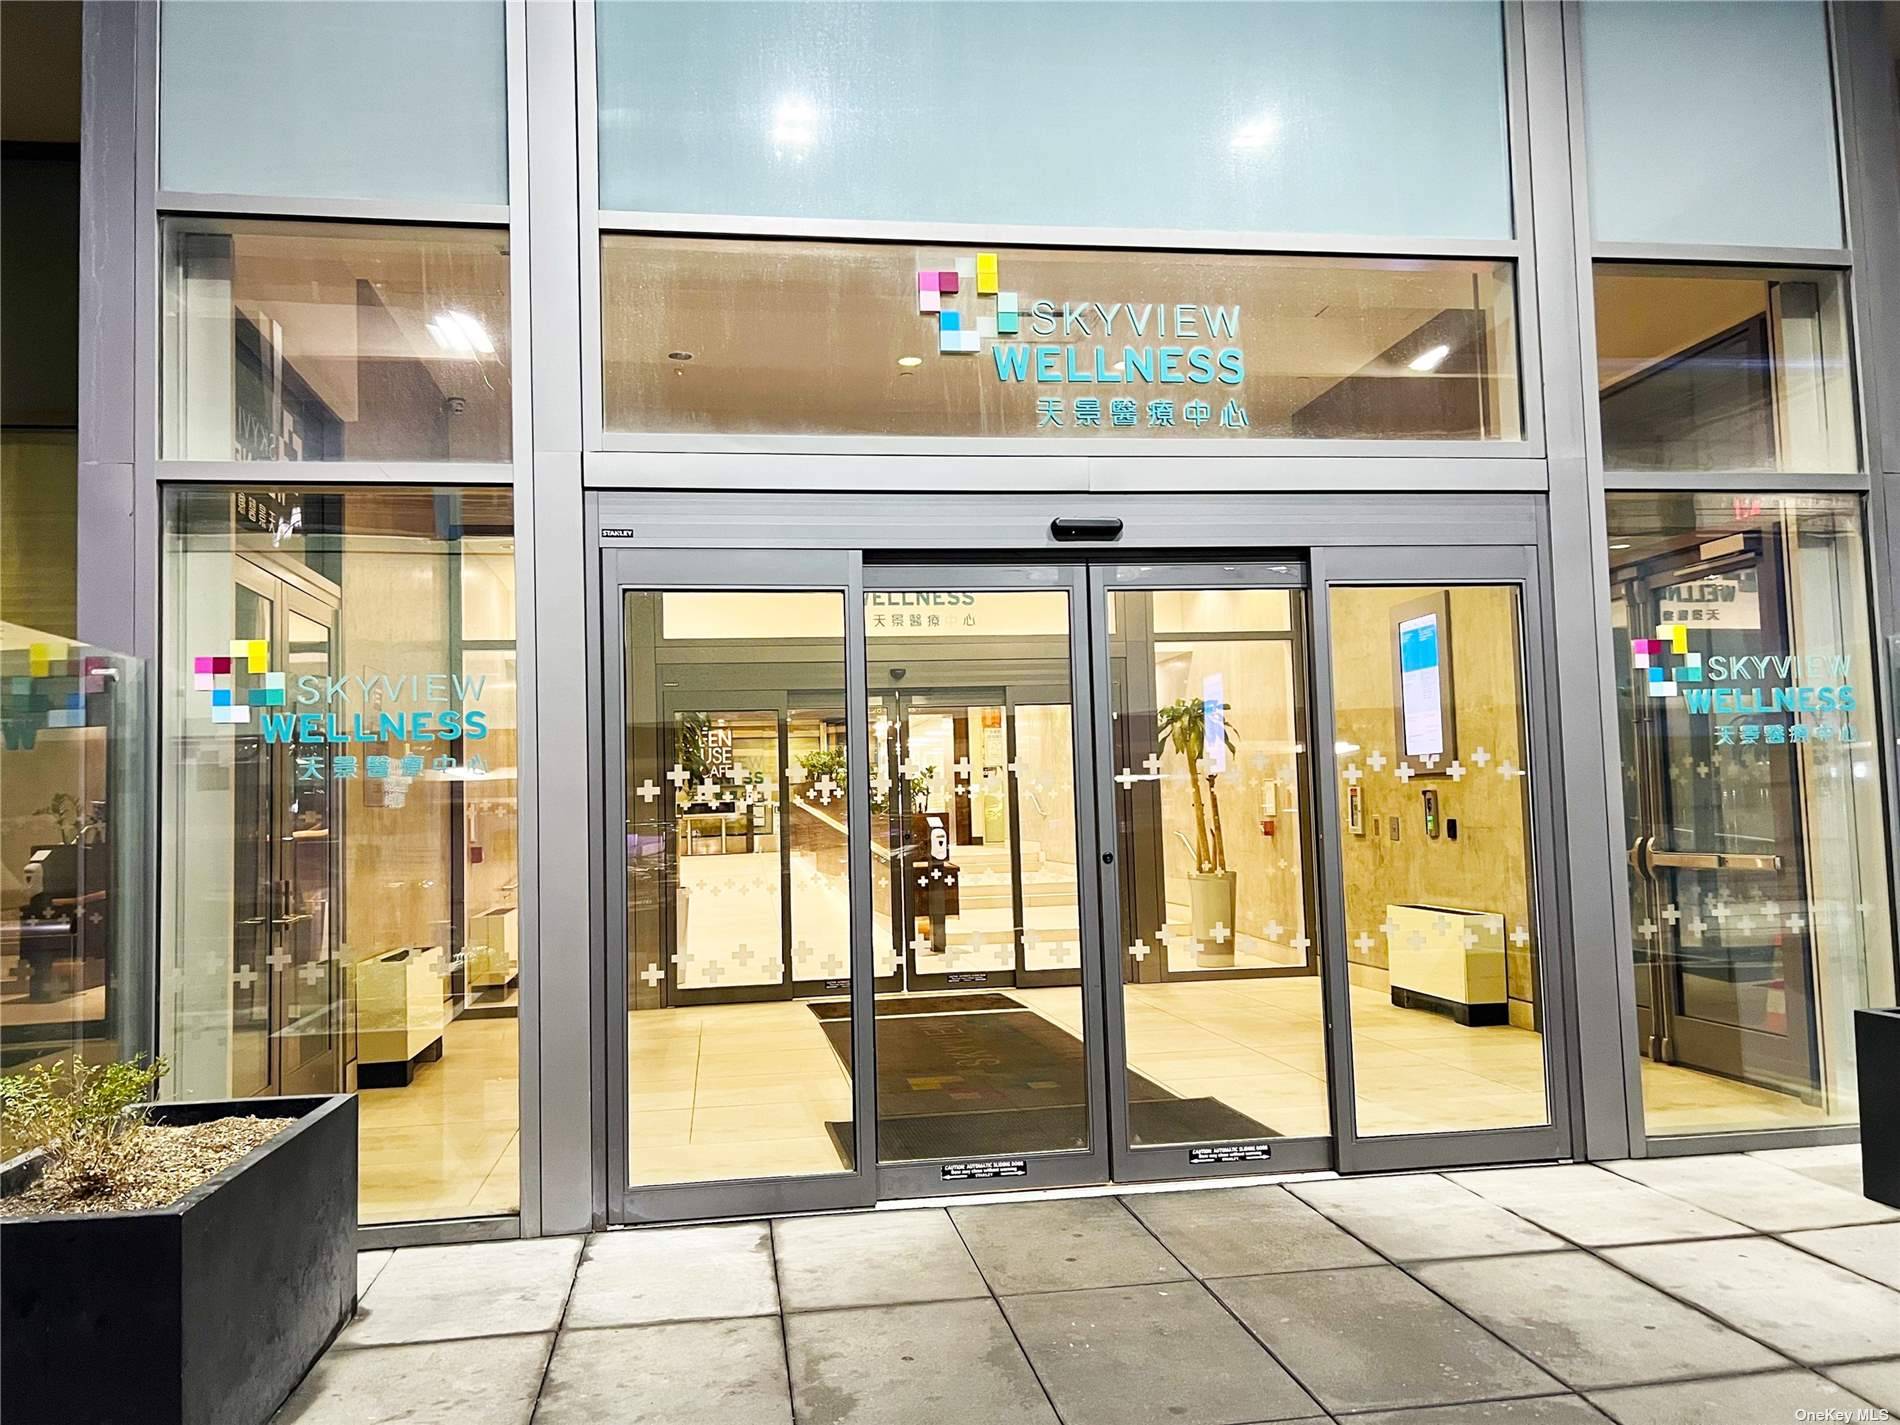 Prime Location Located in the vibrant Skyview Shopping Center, Skyview Wellness is at one of Flushing's busiest spots, offering an ideal setting for medical offices with extensive resource sharing opportunities.